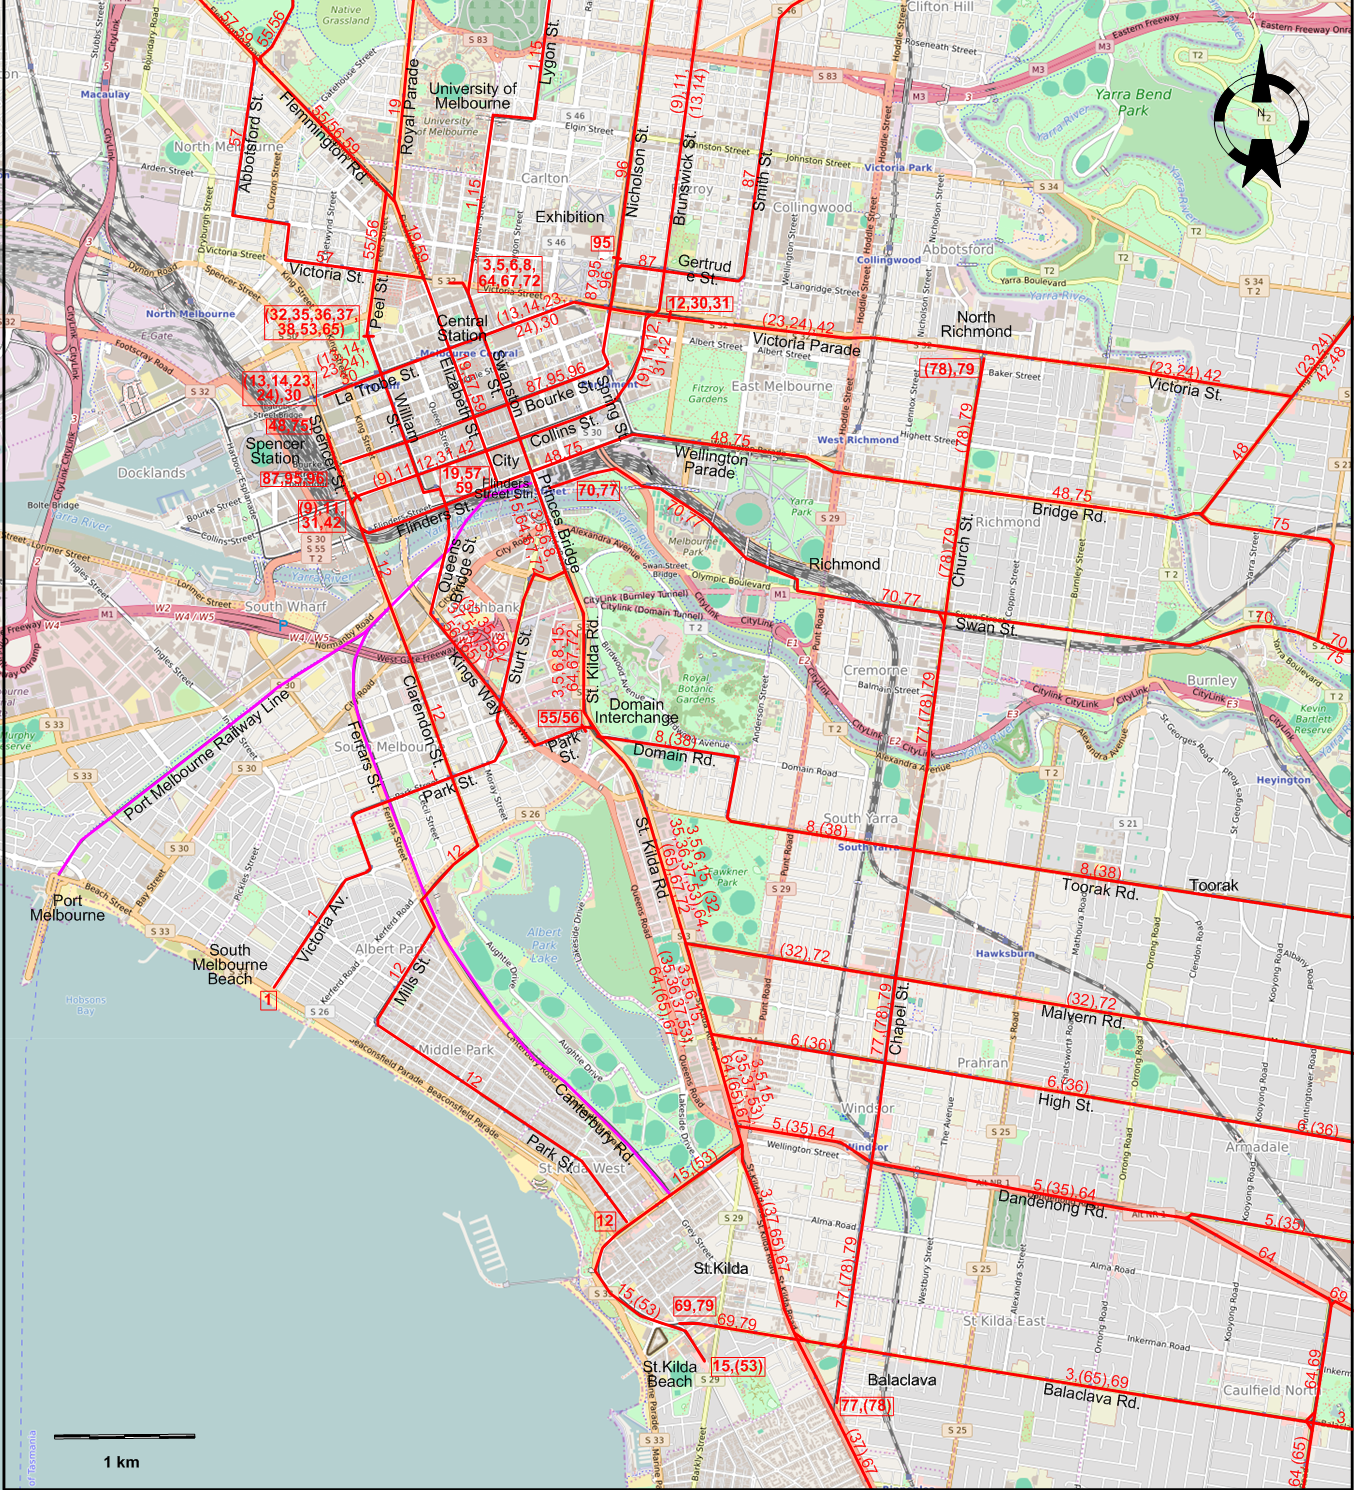 Melbourne-1984 downtown tram map